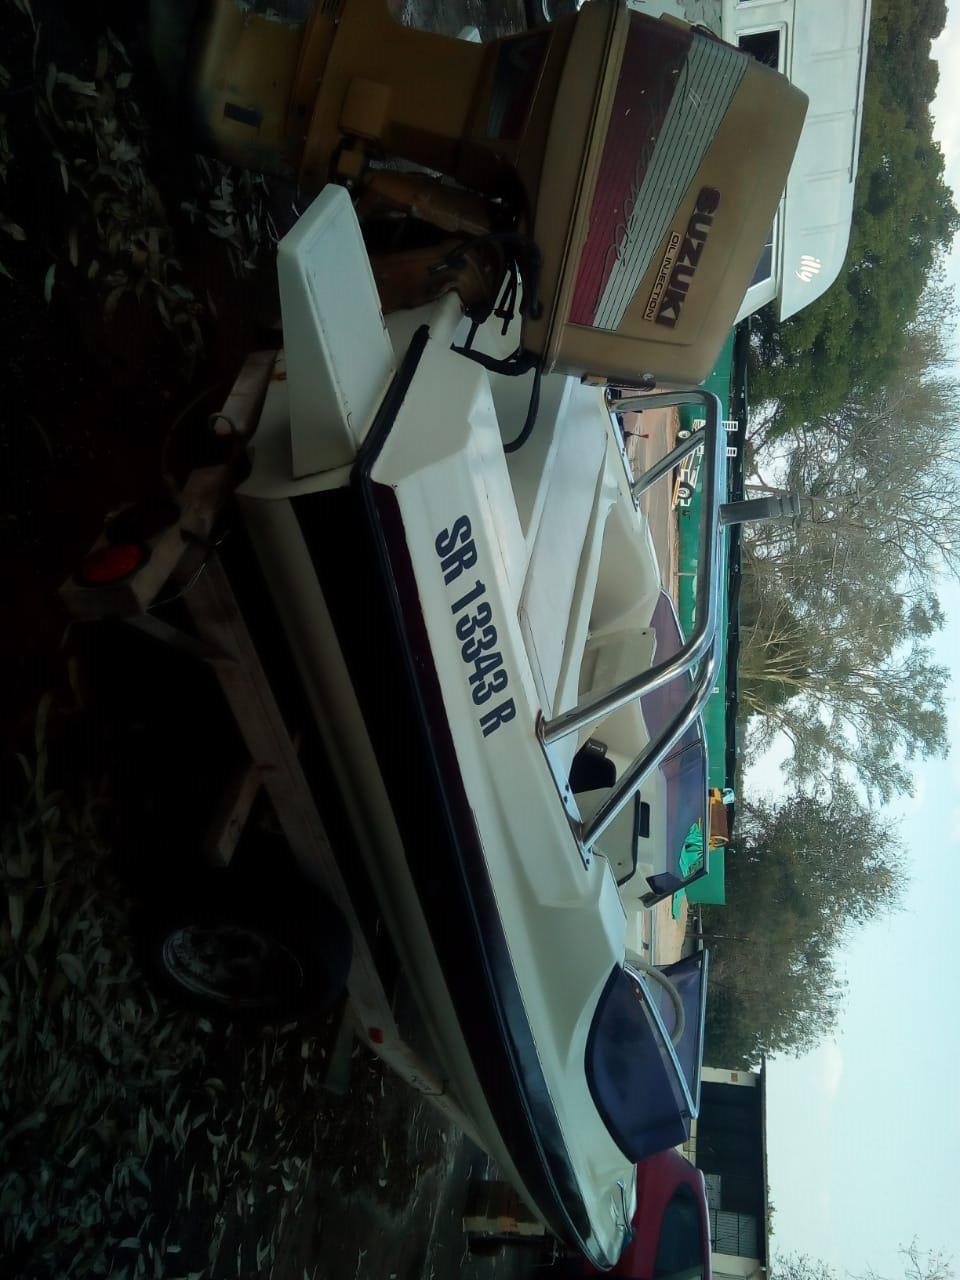 Xtaski boat with 200 motor, in running condition, on trailer